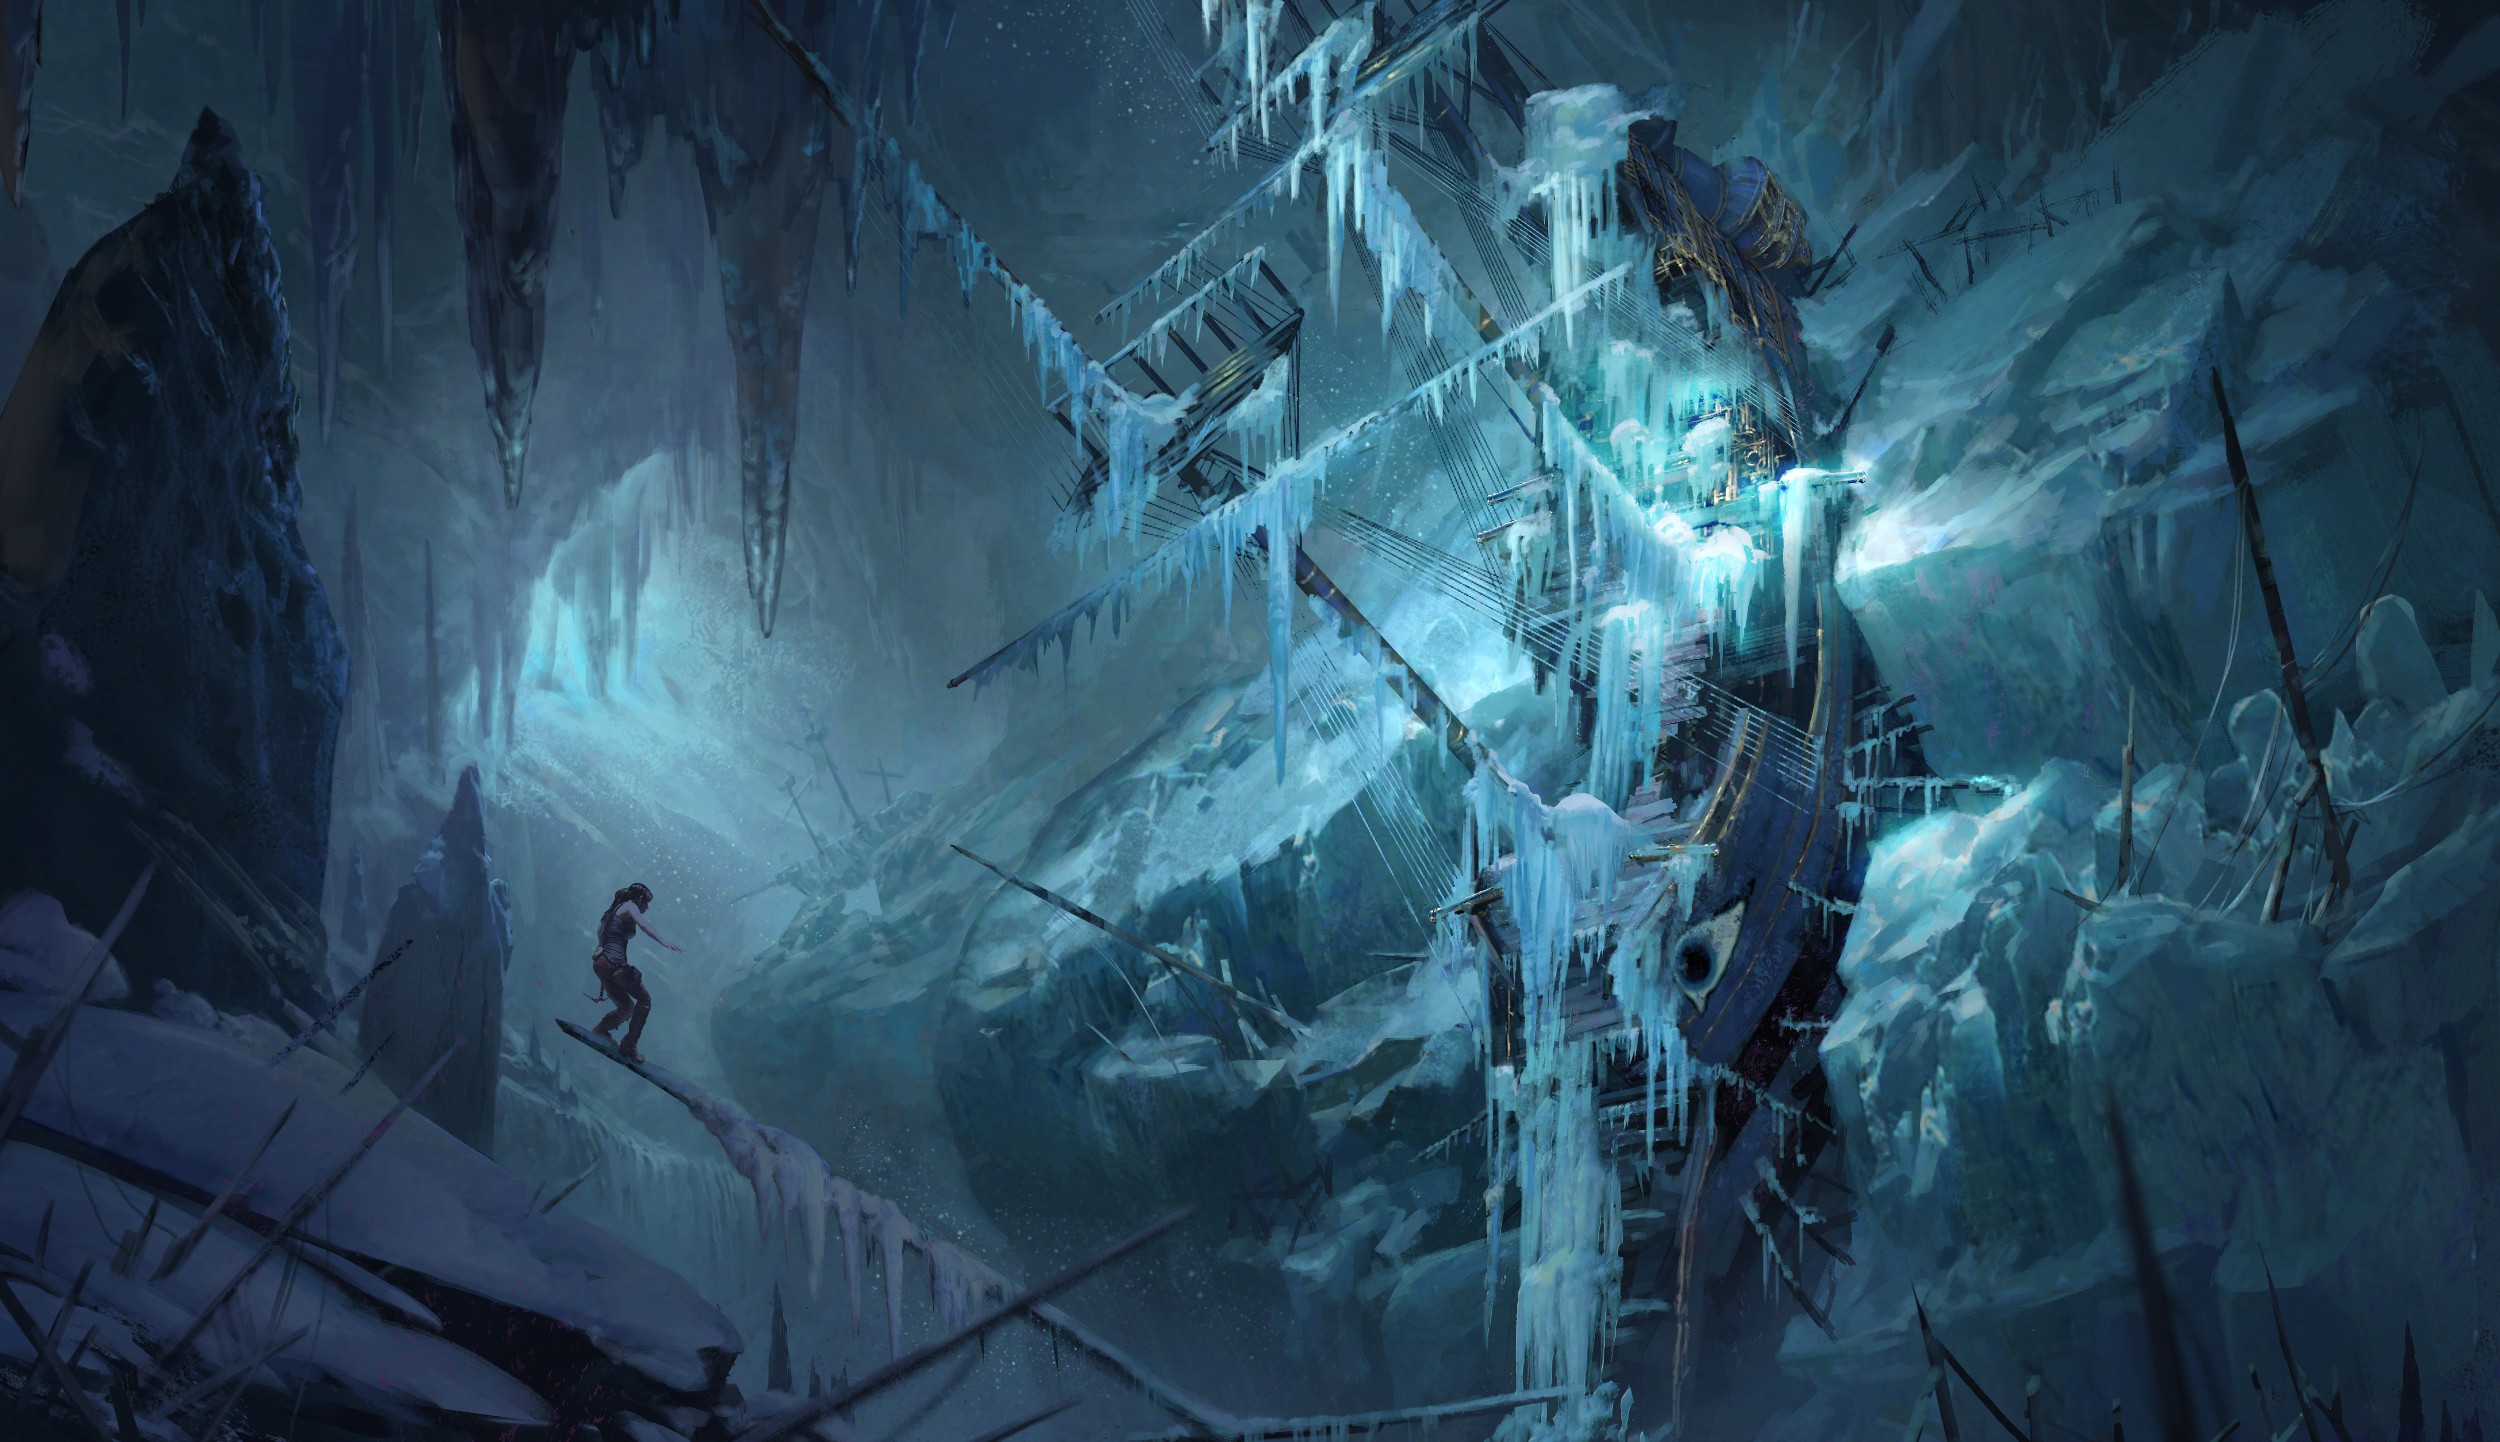 Video Games Lara Croft Tomb Raider Rise Of The Tomb Raider Cyan Ice Cave Ship Video Game Art Icicle  2500x1442